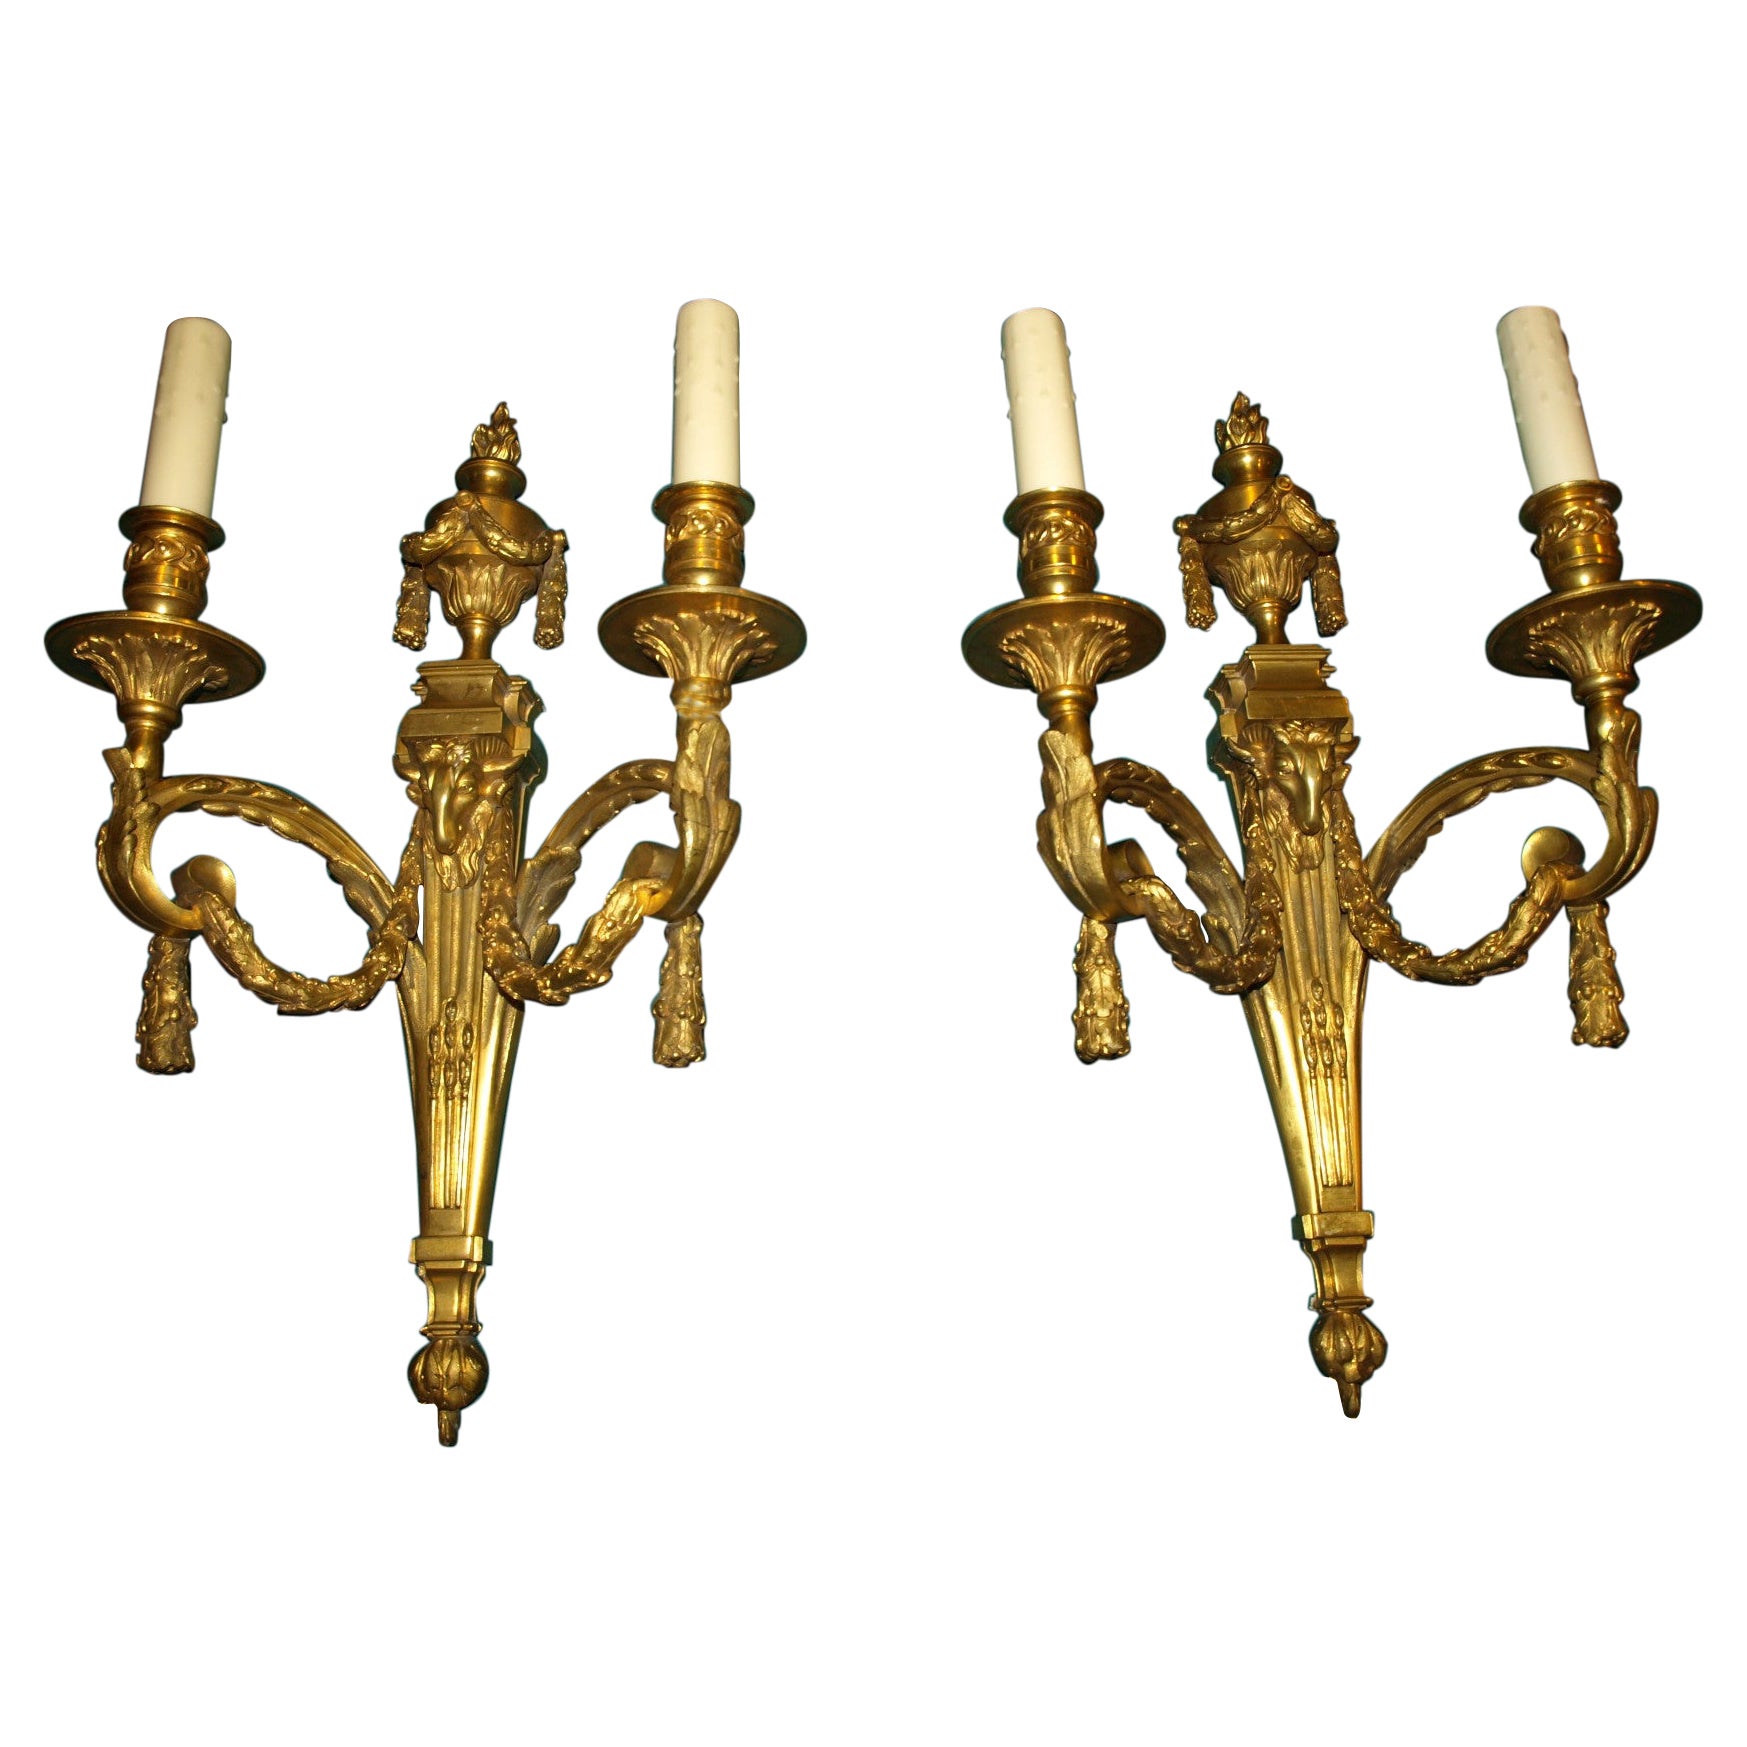 Very fine pair of gilt bronze wall sconces. France, circa 1900.
Dimensions: Height 19